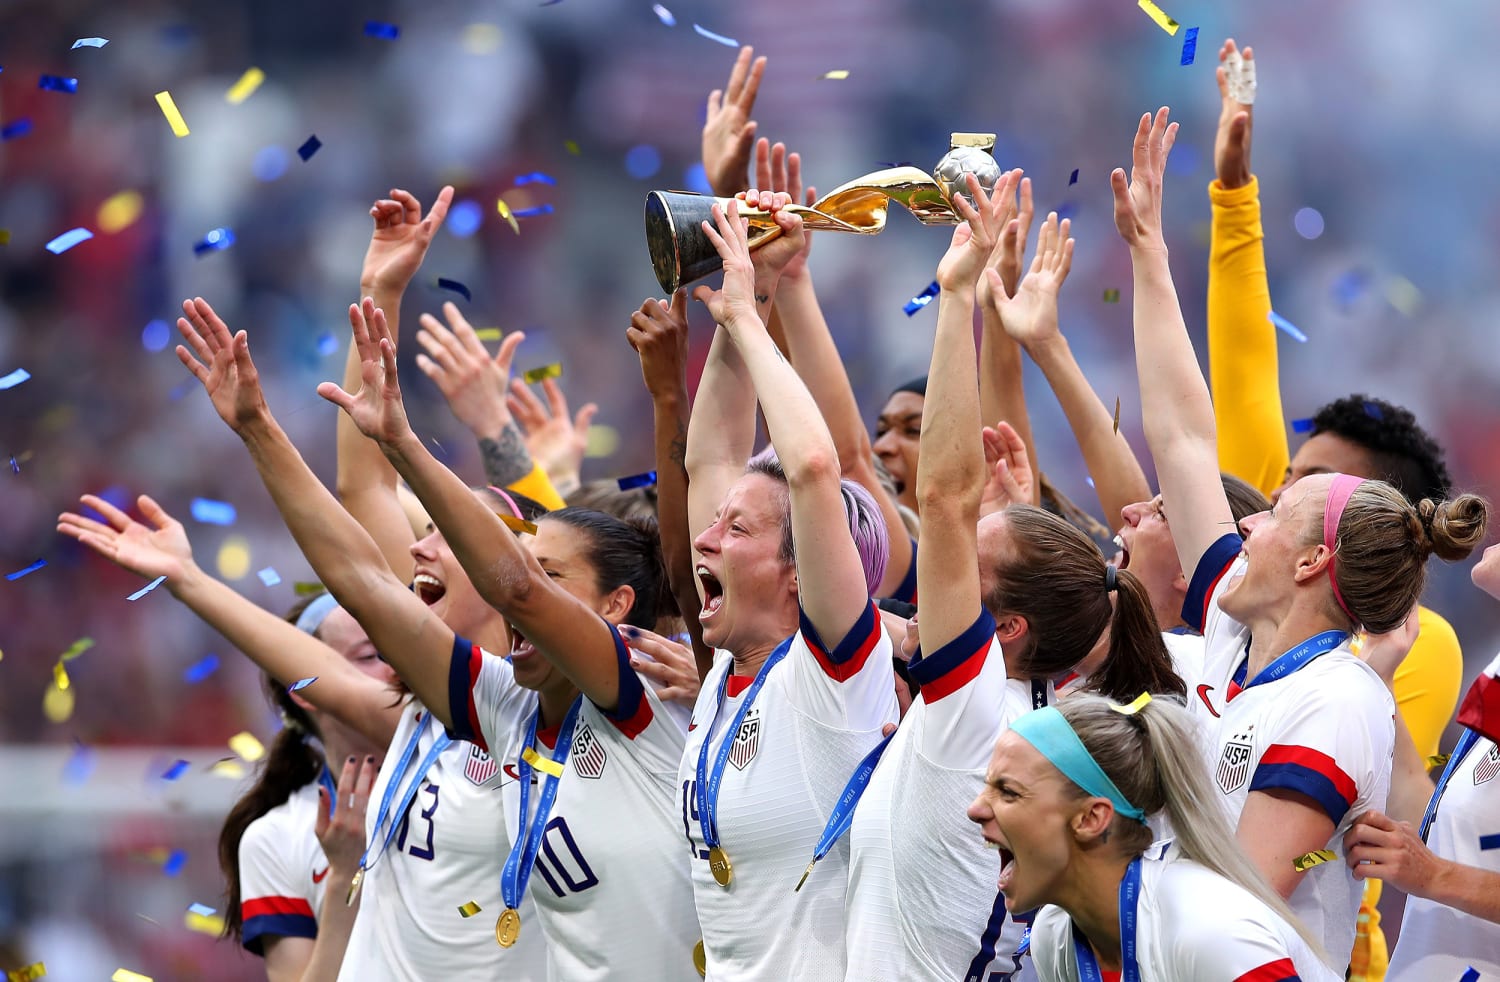 Money, Equity And Taxes Make News Early At The 2023 Women's World Cup